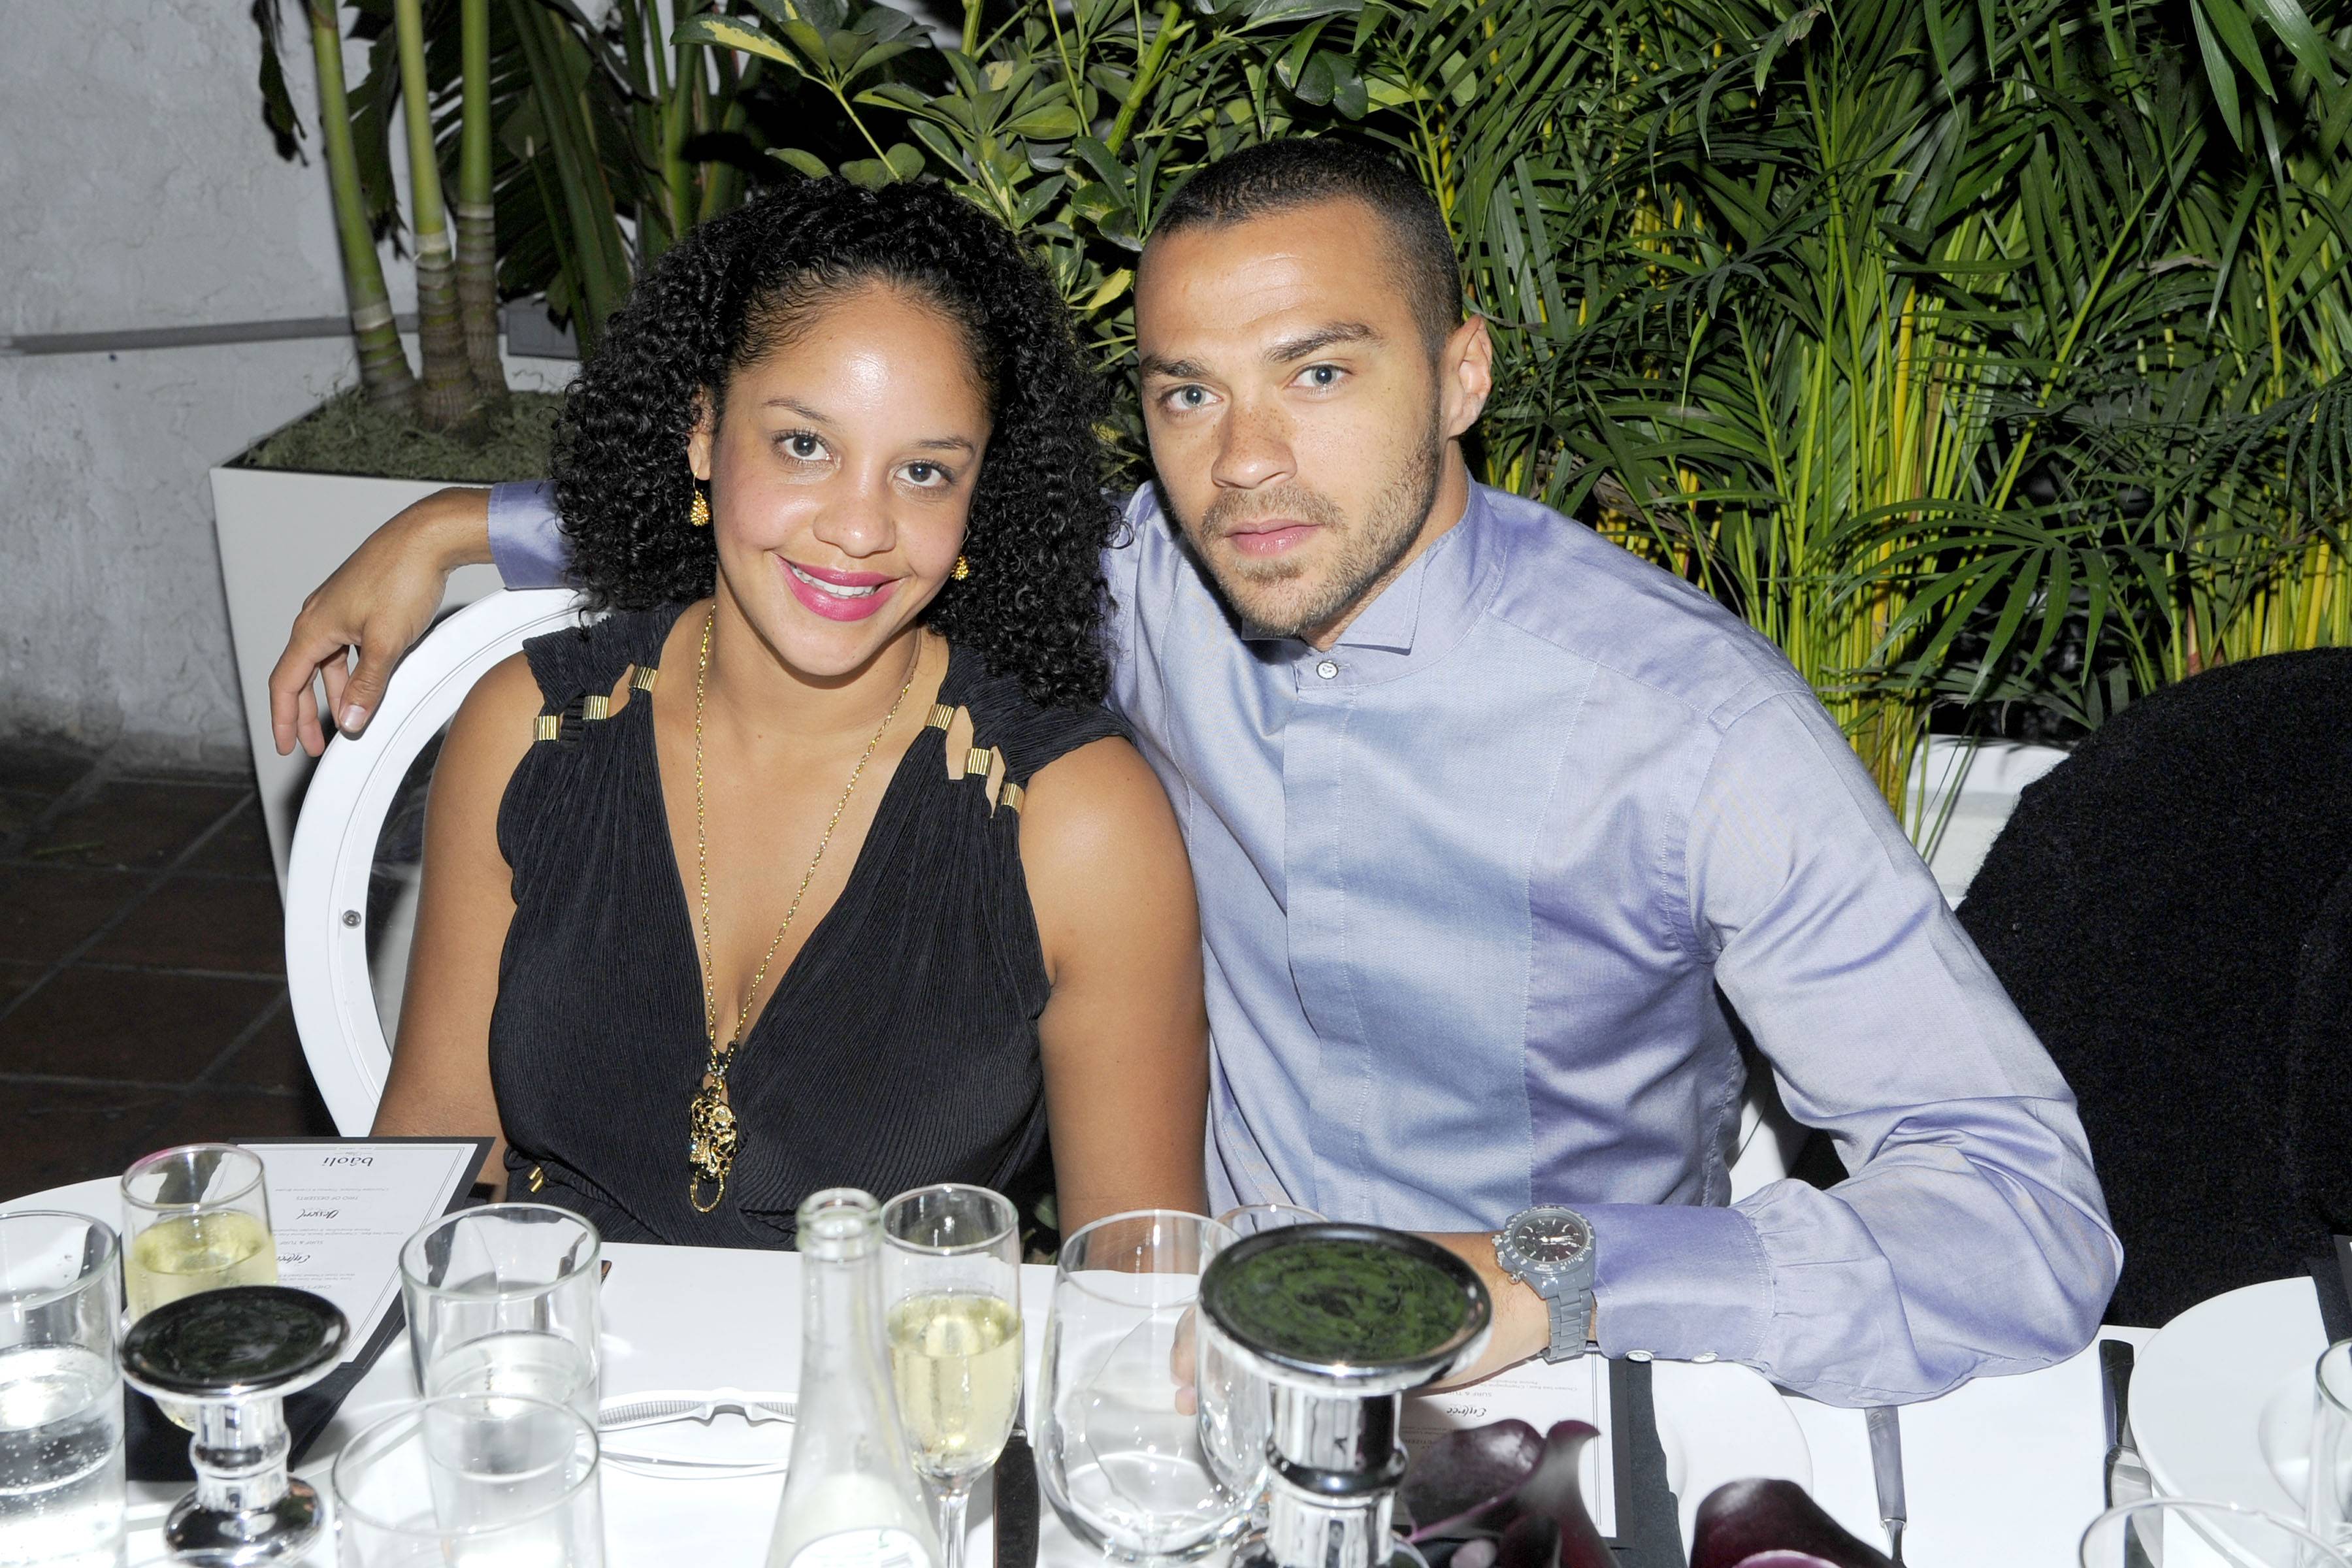 http://hauteliving.com/wp-content/uploads/2011/12/Jesse-Williams-and-fiancee-Aryn-Drake-Lee.jpg